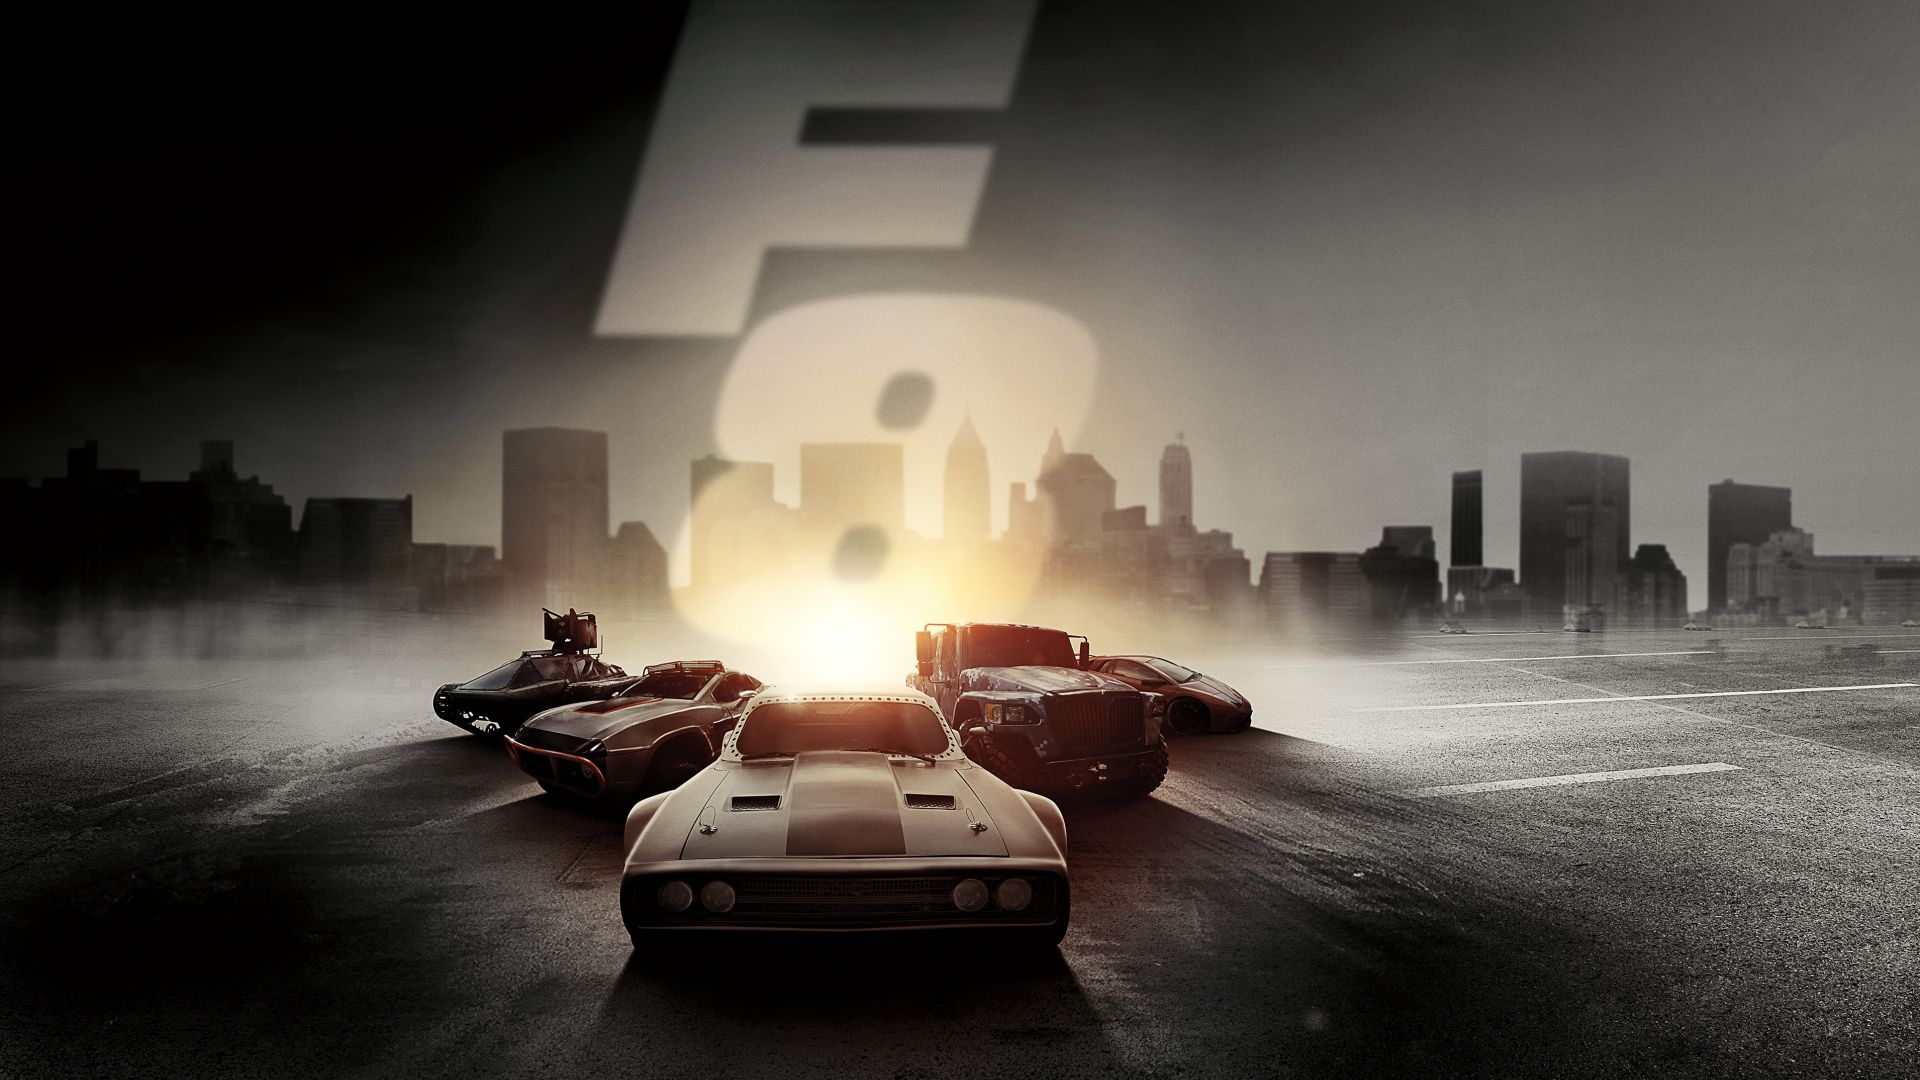 Share more than 70 fast and furious wallpaper 4k best - in.cdgdbentre